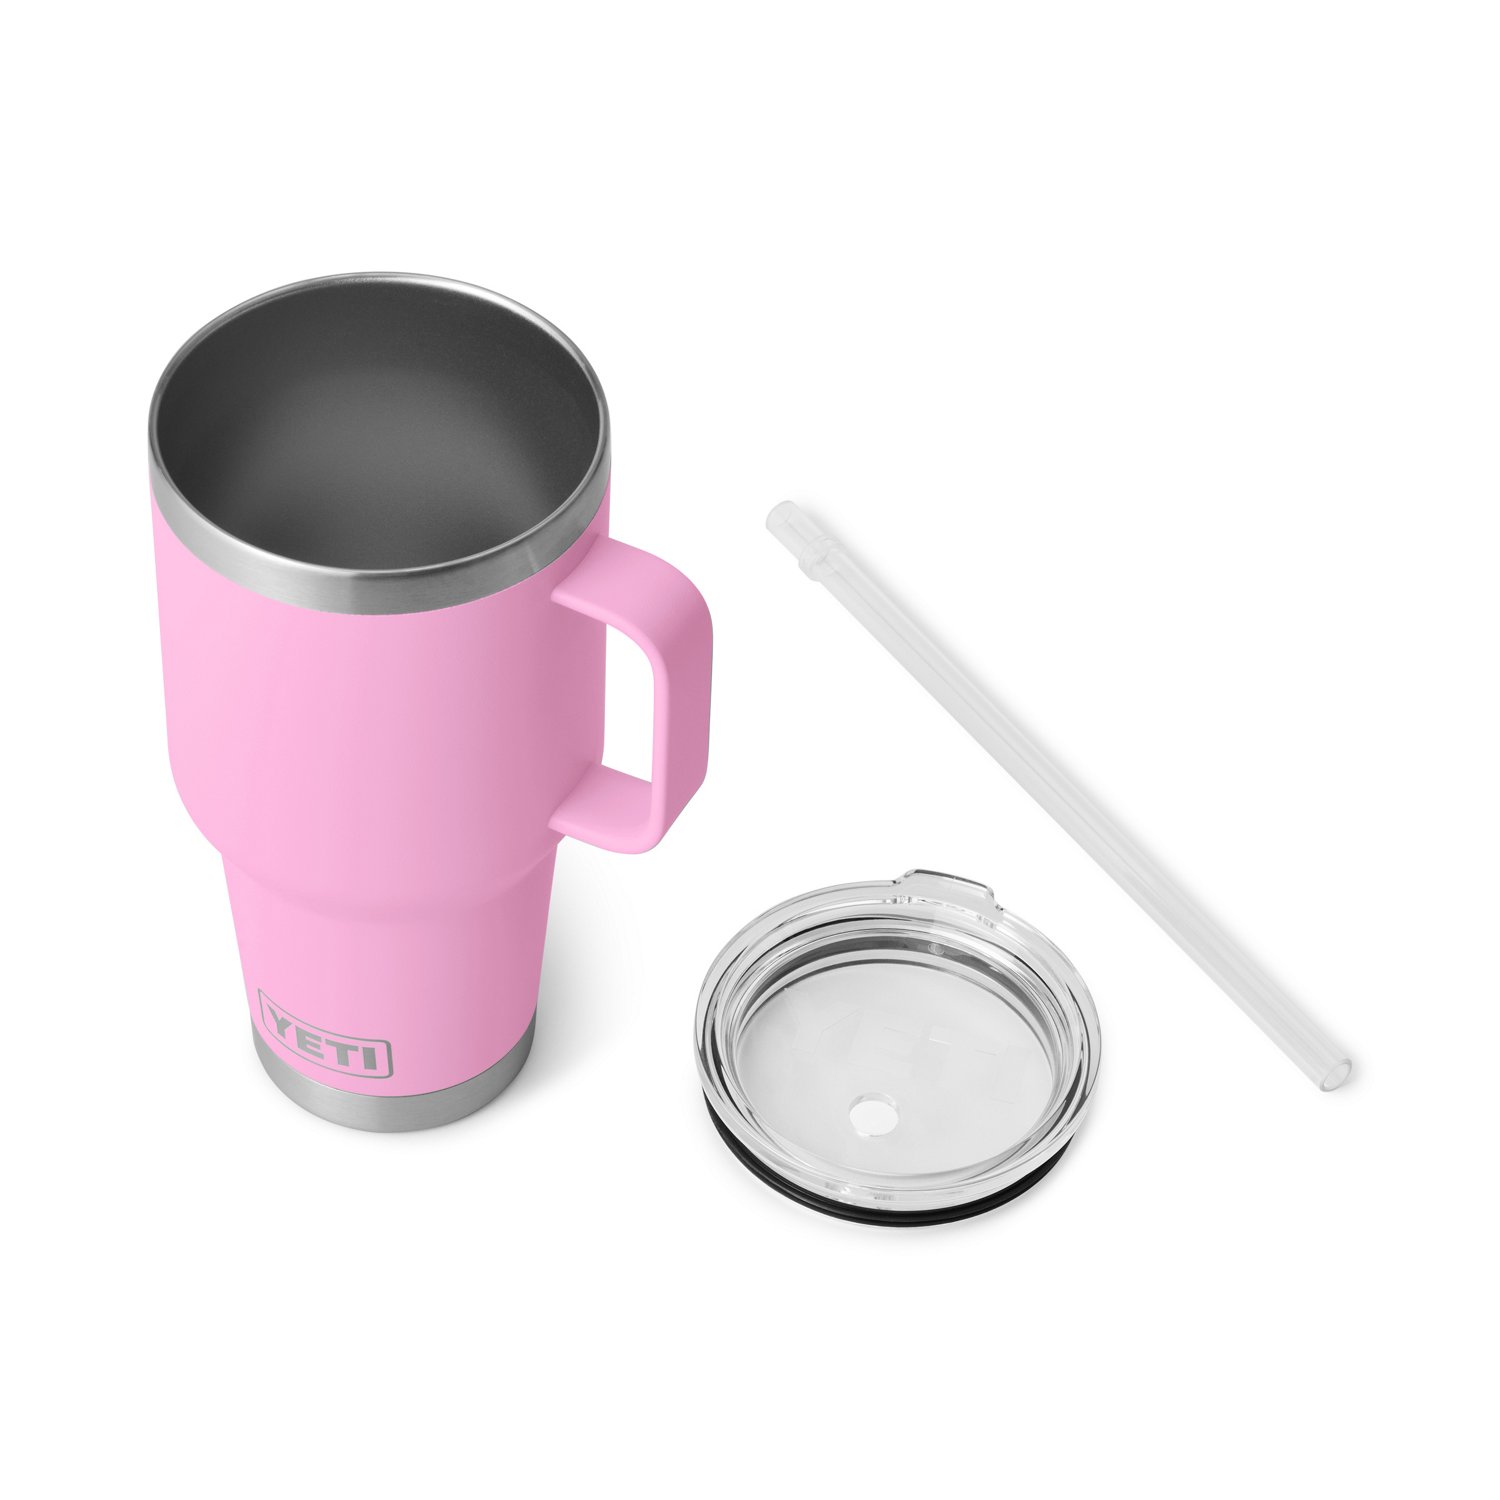 https://academy.scene7.com/is/image/academy//drinkware/yeti-rambler-35-oz-straw-mug-21071501922-pink/e168628d3c0a45d5b159a7588930ed36?$pdp-mobile-gallery-ng$